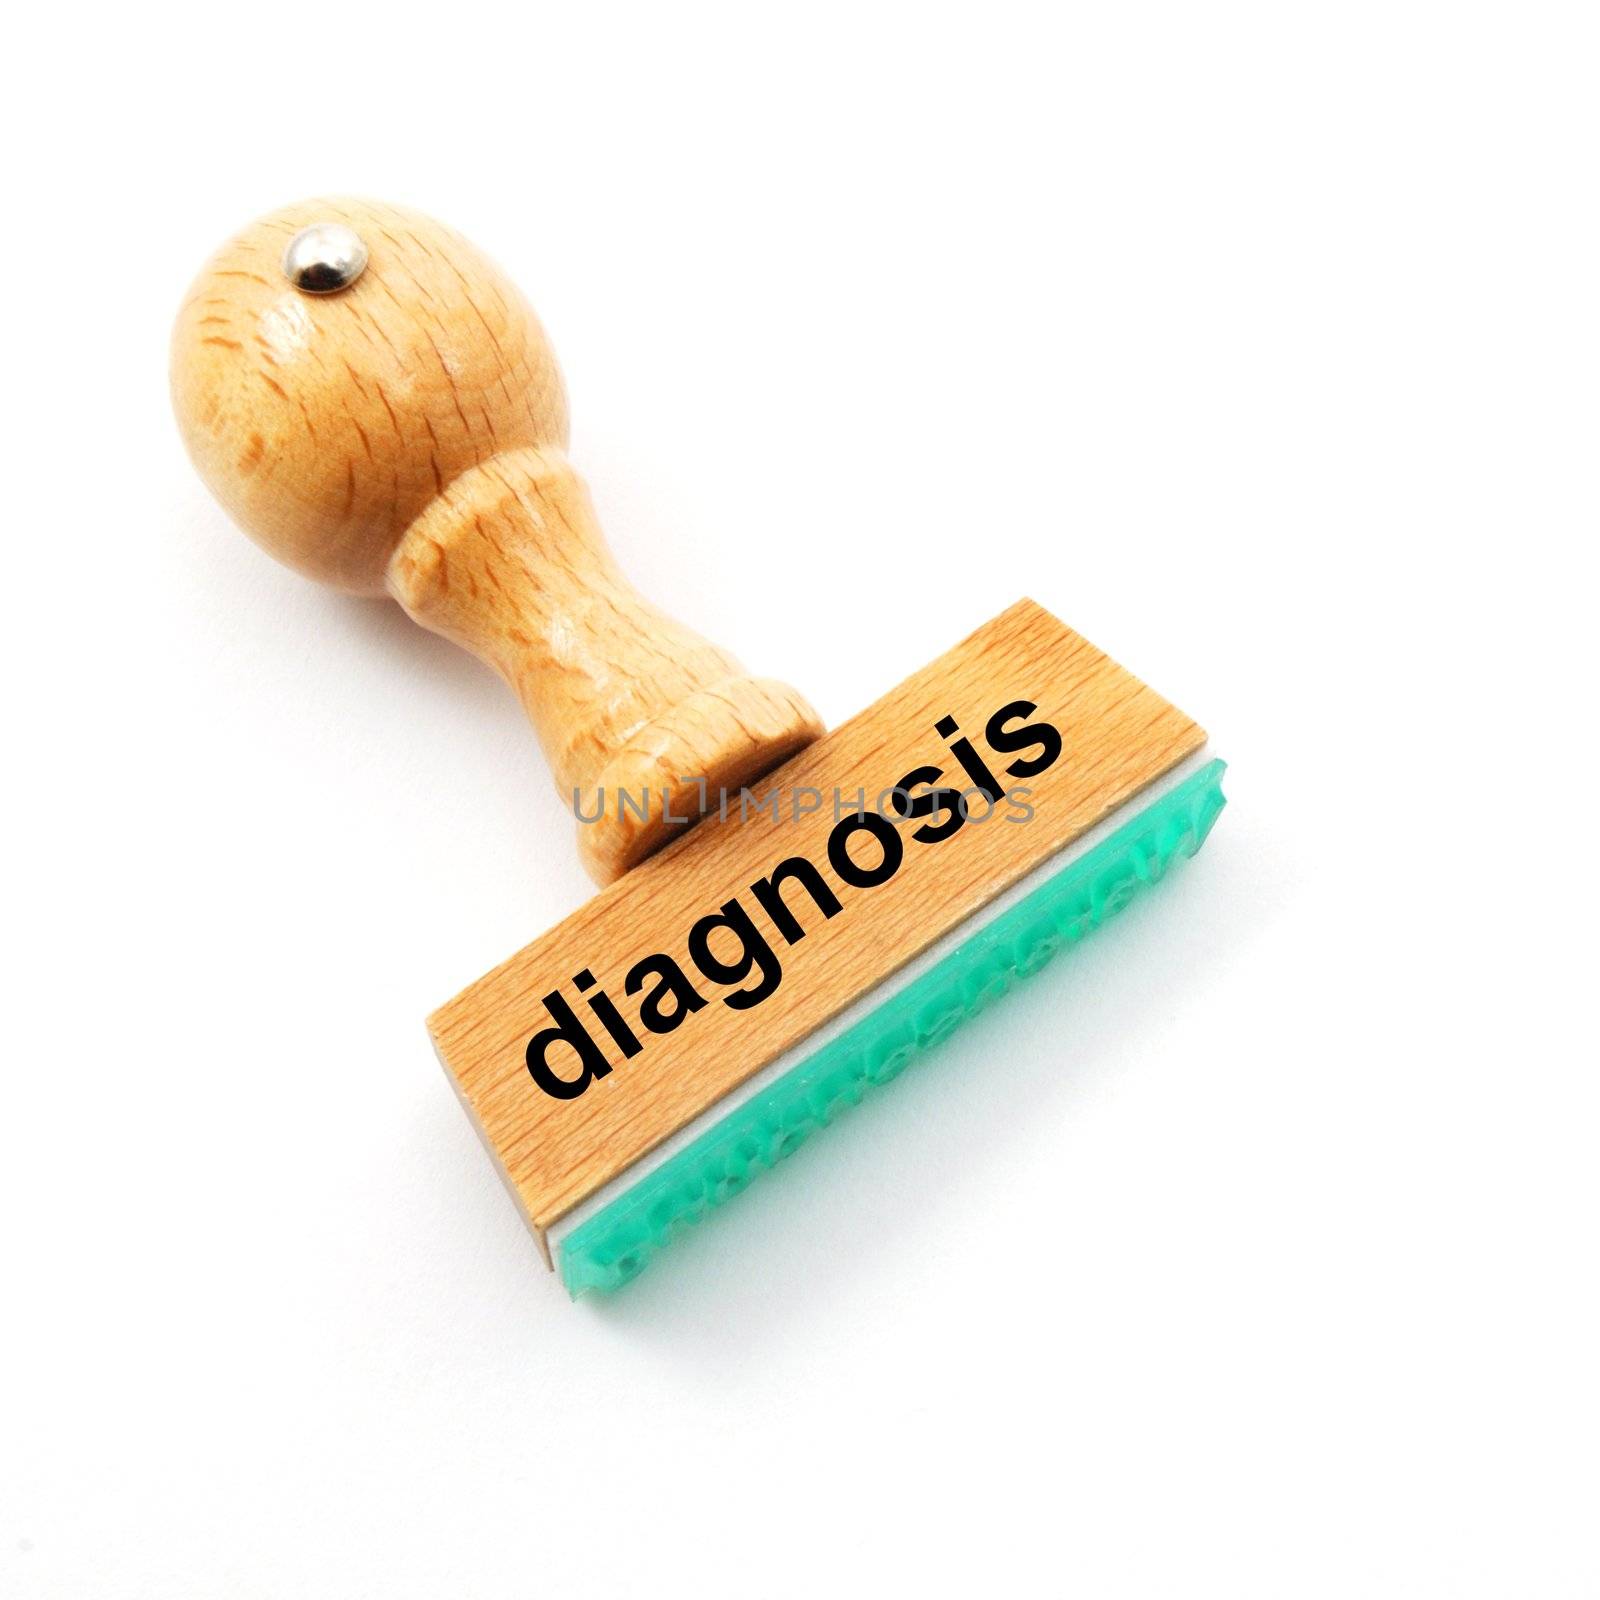 diagnosis stamp in hospital offcie showing health concept